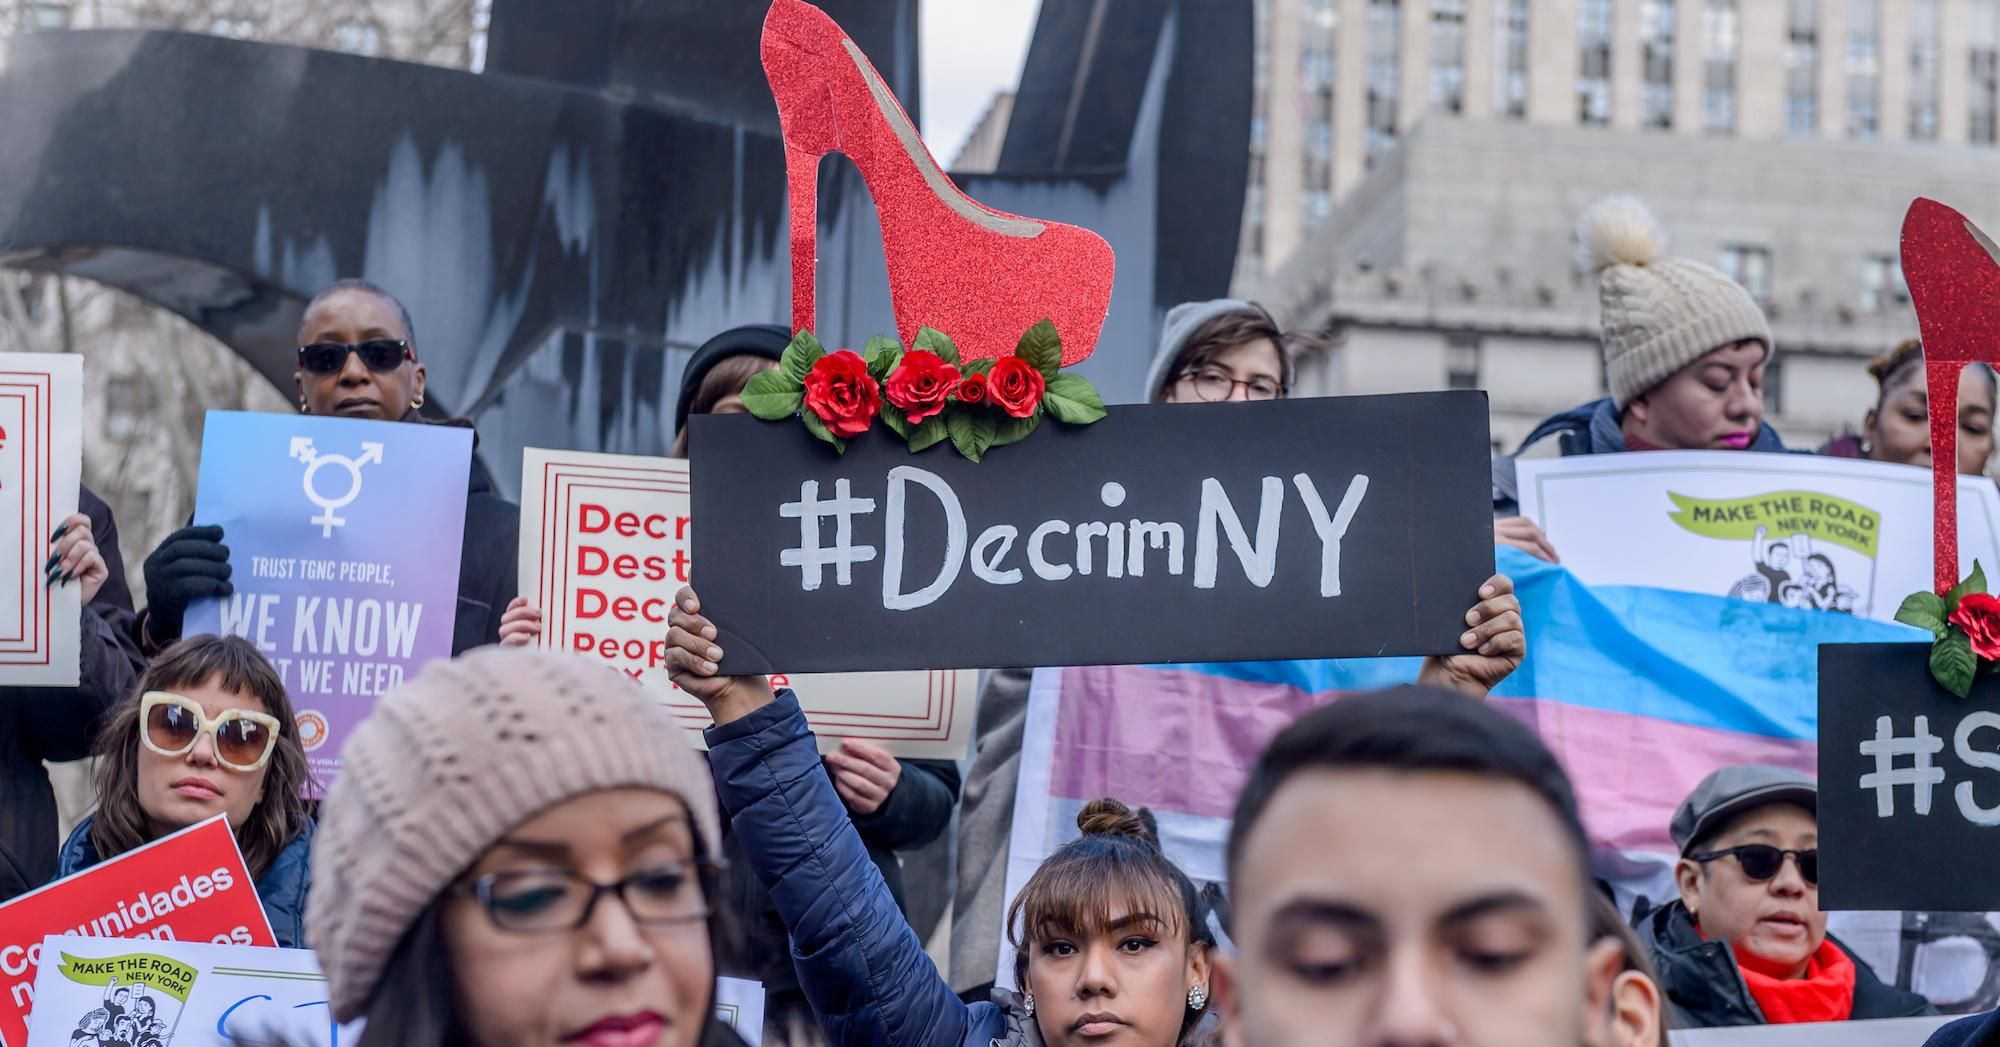 LGBTQ+, immigrant rights, harm reduction, and criminal justice reform groups, led by people who trade sex, launched a 20+ organization coalition, Decrim NY, to decriminalize and decarcerate the sex trades in New York City and state.